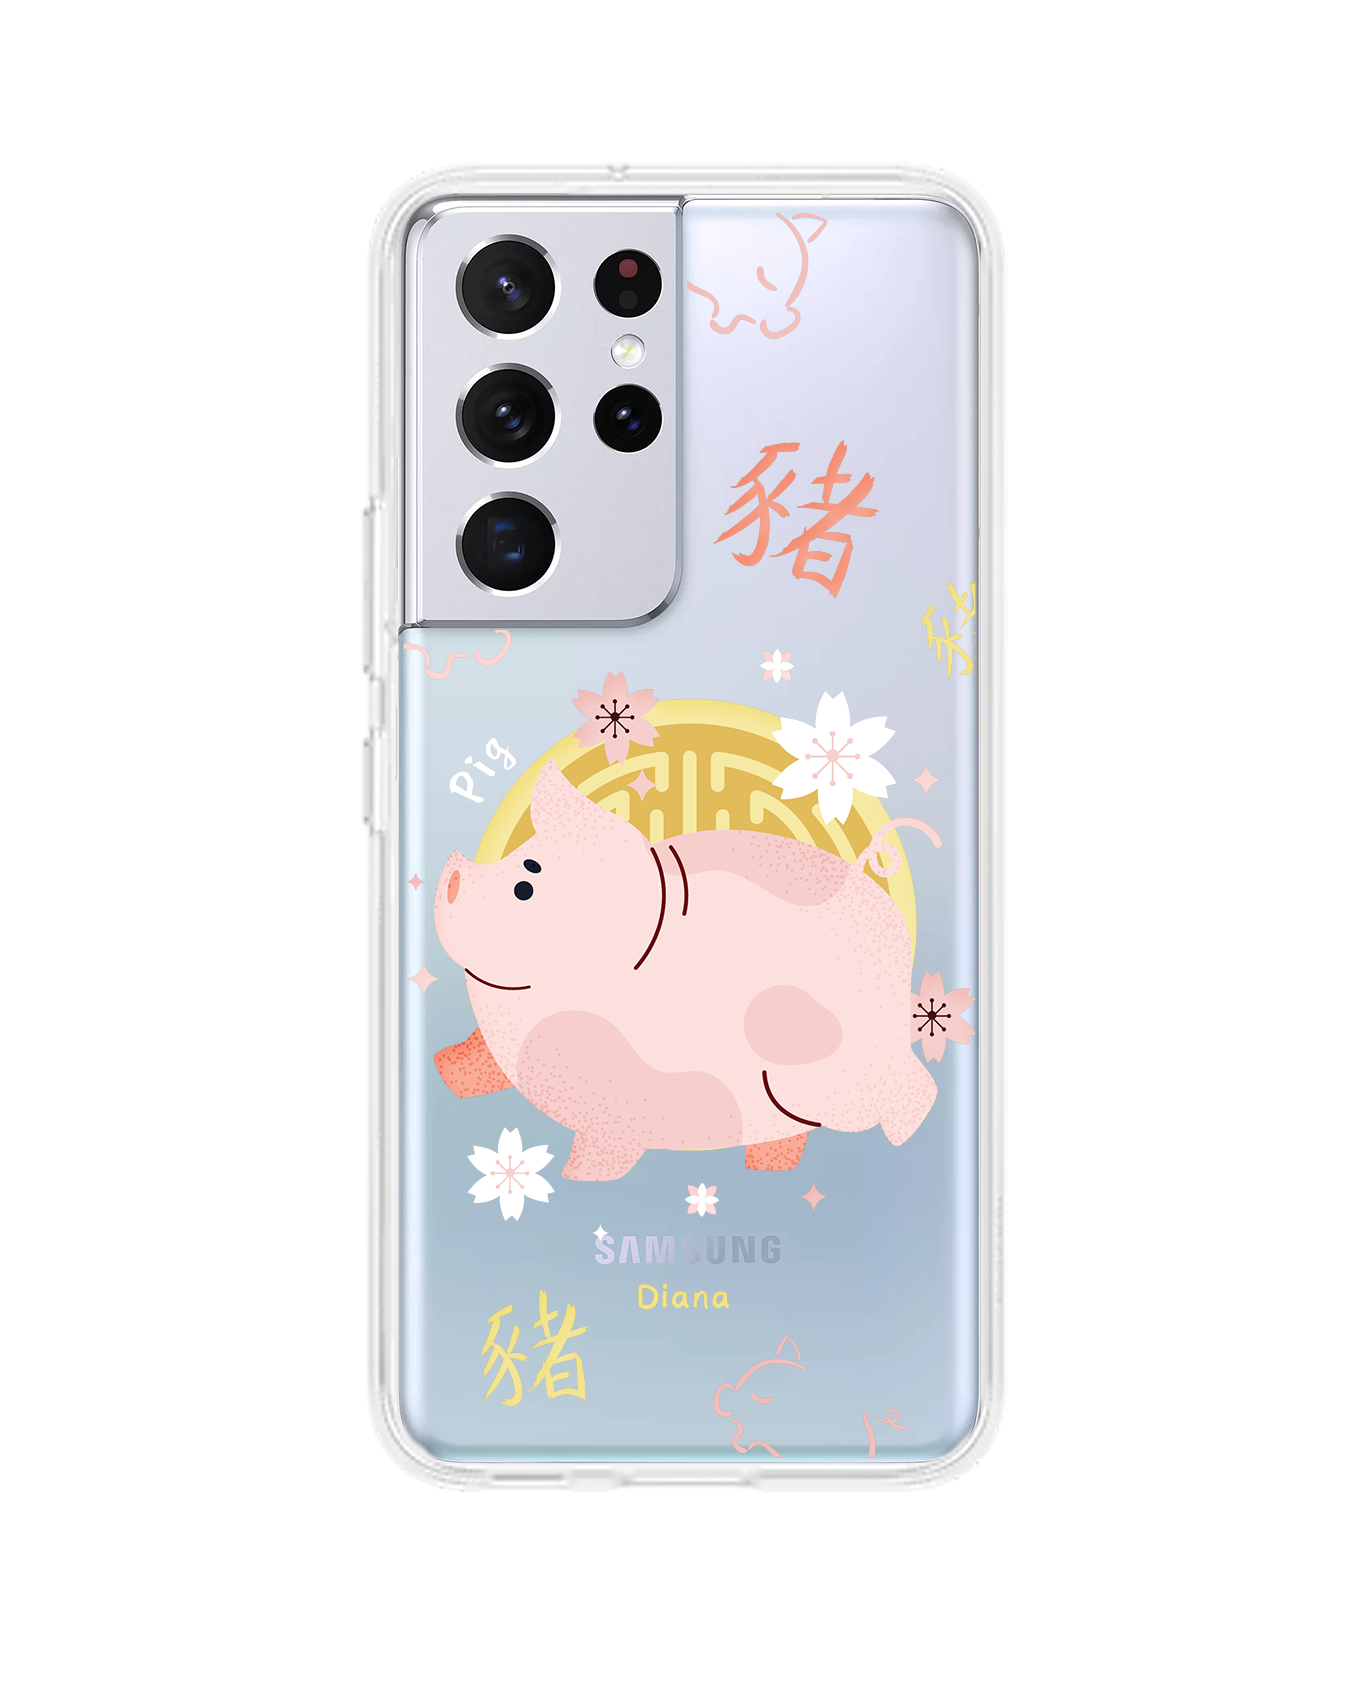 Android Rearguard Hybrid Case - Pig (Chinese Zodiac / Shio)